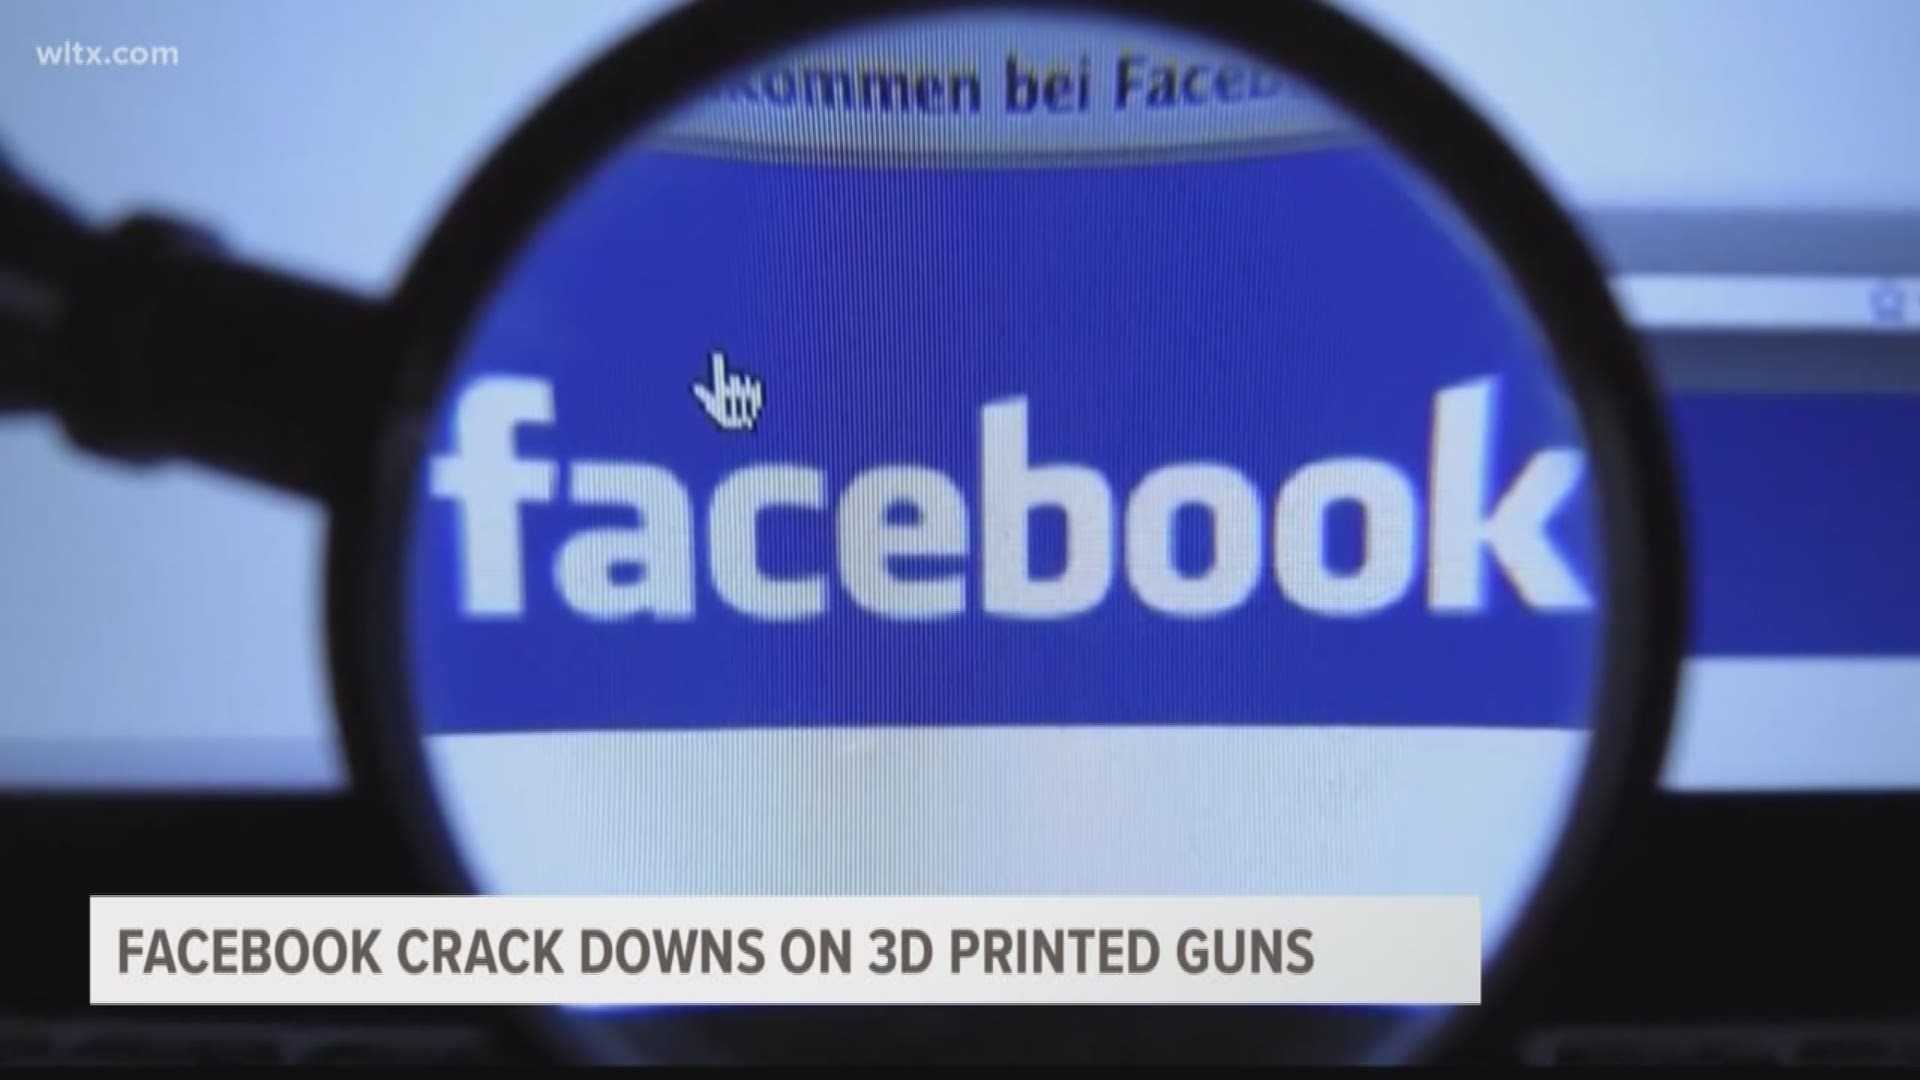 The social media giant said sharing instruction on how to print firearms using 3D printers is not allowed under their community standars.